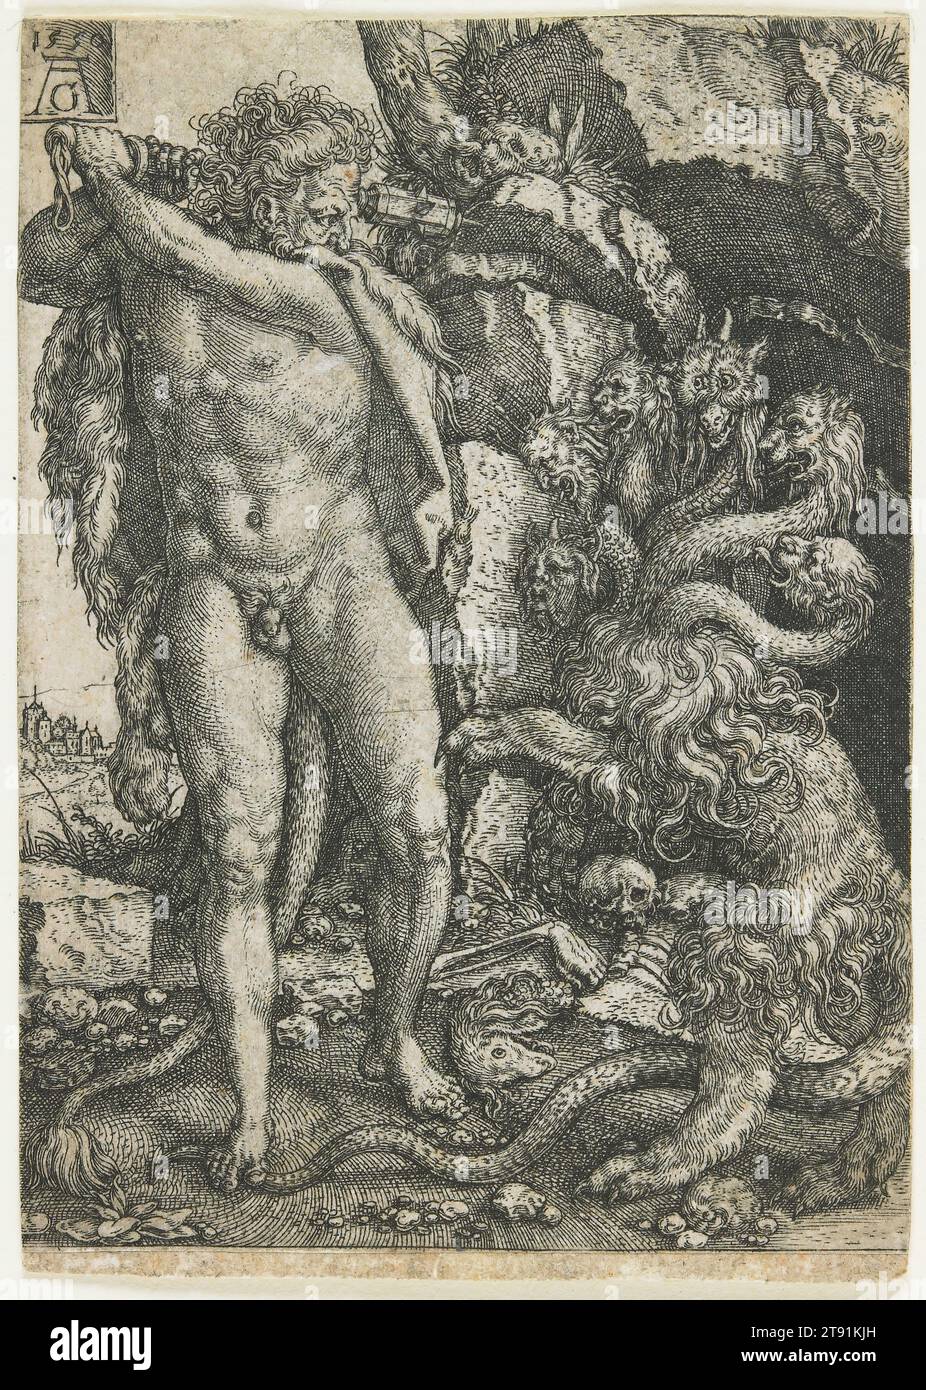 Hercules Destroys the Lernaean Hydra, 1550, Heinrich Aldegrever, German, 1502–after 1555/61, 3 5/8 x 2 5/8 in. (9.21 x 6.67 cm) (image), Engraving, Germany, 16th century, The deeds of Hercules were endlessly popular in the Renaissance as models of strength and virtue. Heinrich Aldegrever portrays the hero engaged in two particularly desperate labors. In one he had to crush the menacing nine-headed Hydra-difficult to do because each time a head was cut off, two appeared in its place. The other task was to descend to Hades and bring back Cerberus, the hideous beast guarding the entrance Stock Photo